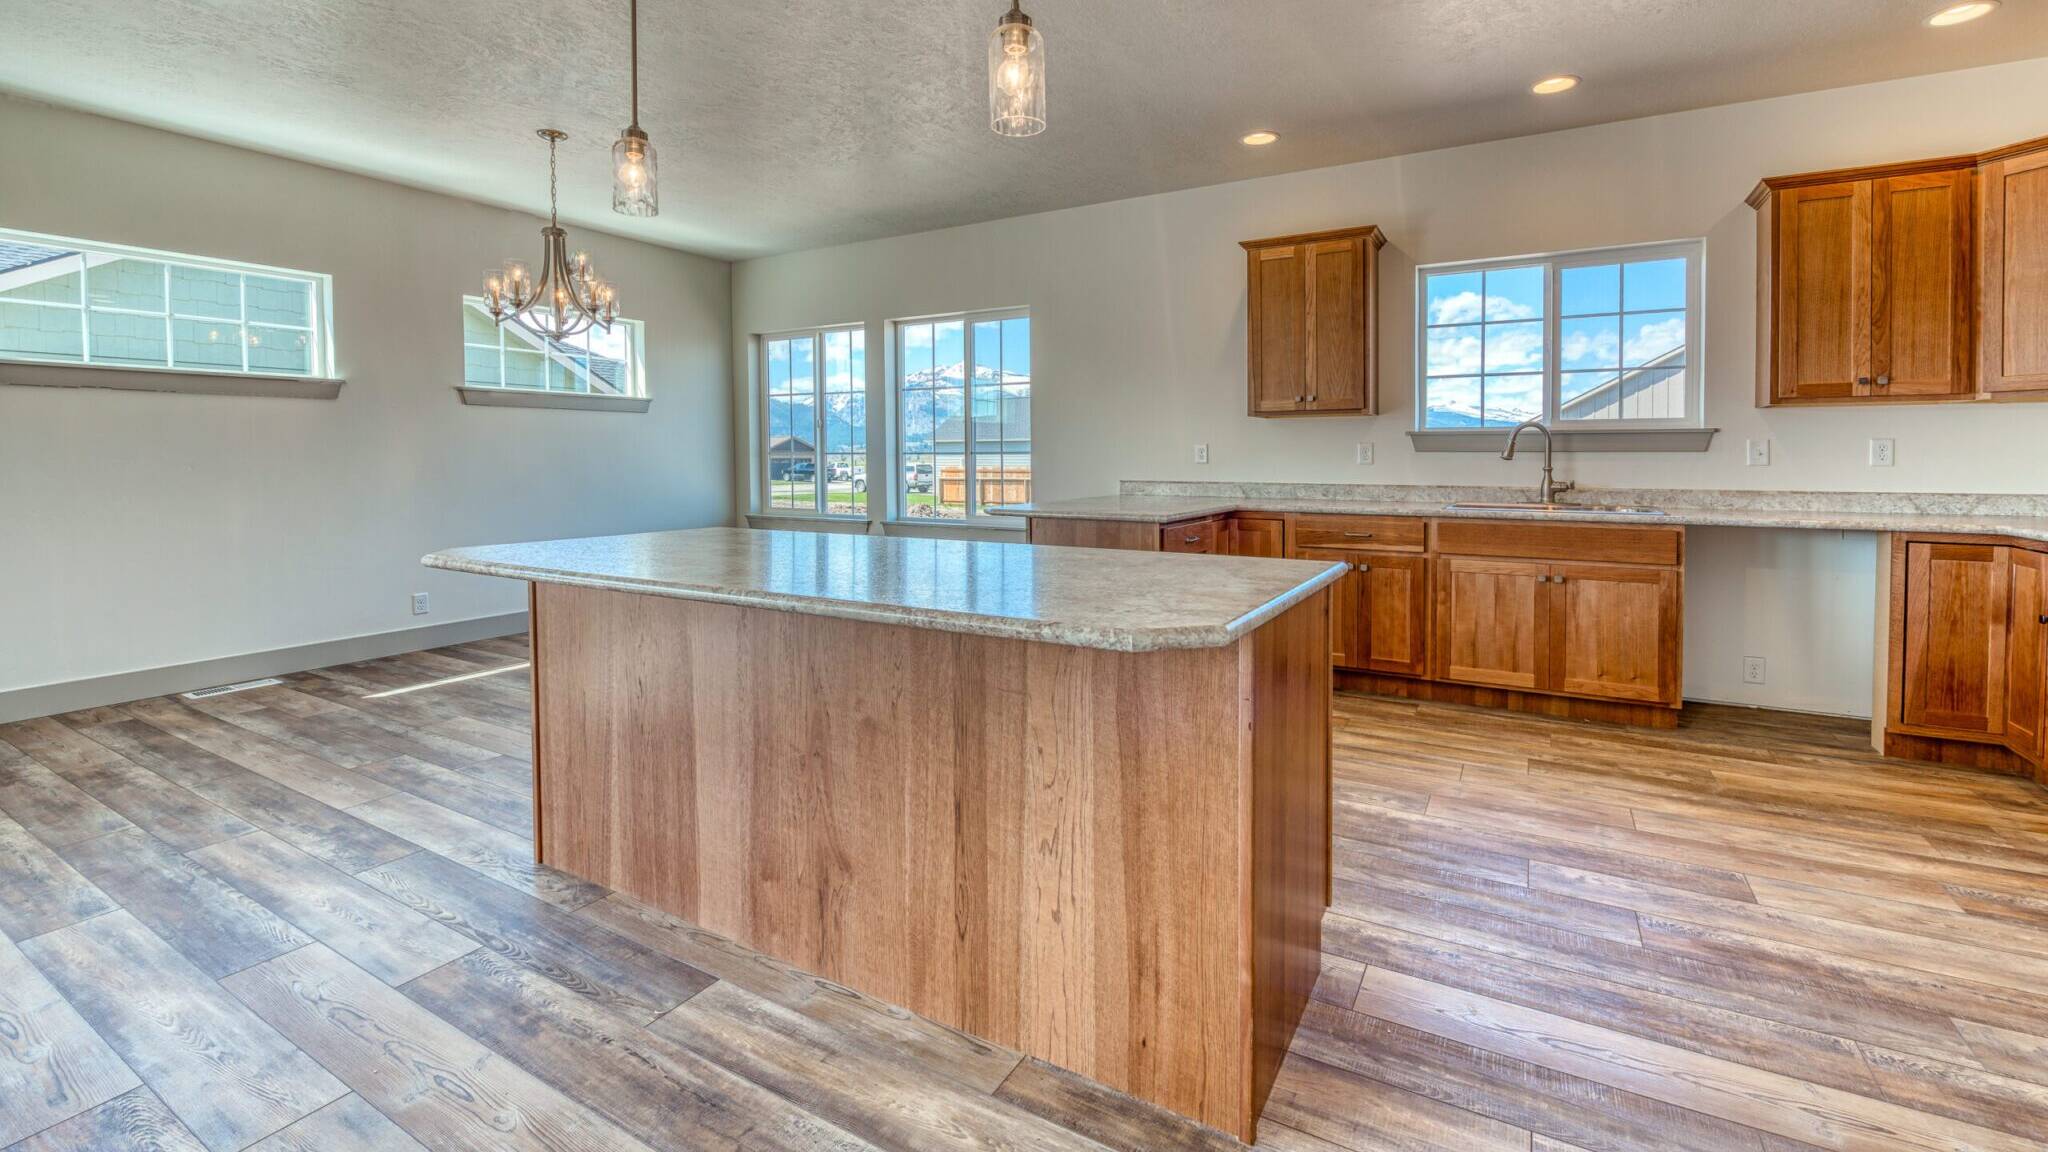 Kitchen in The Country Cottage model home - built by Big Sky Builders in Hamilton, MT